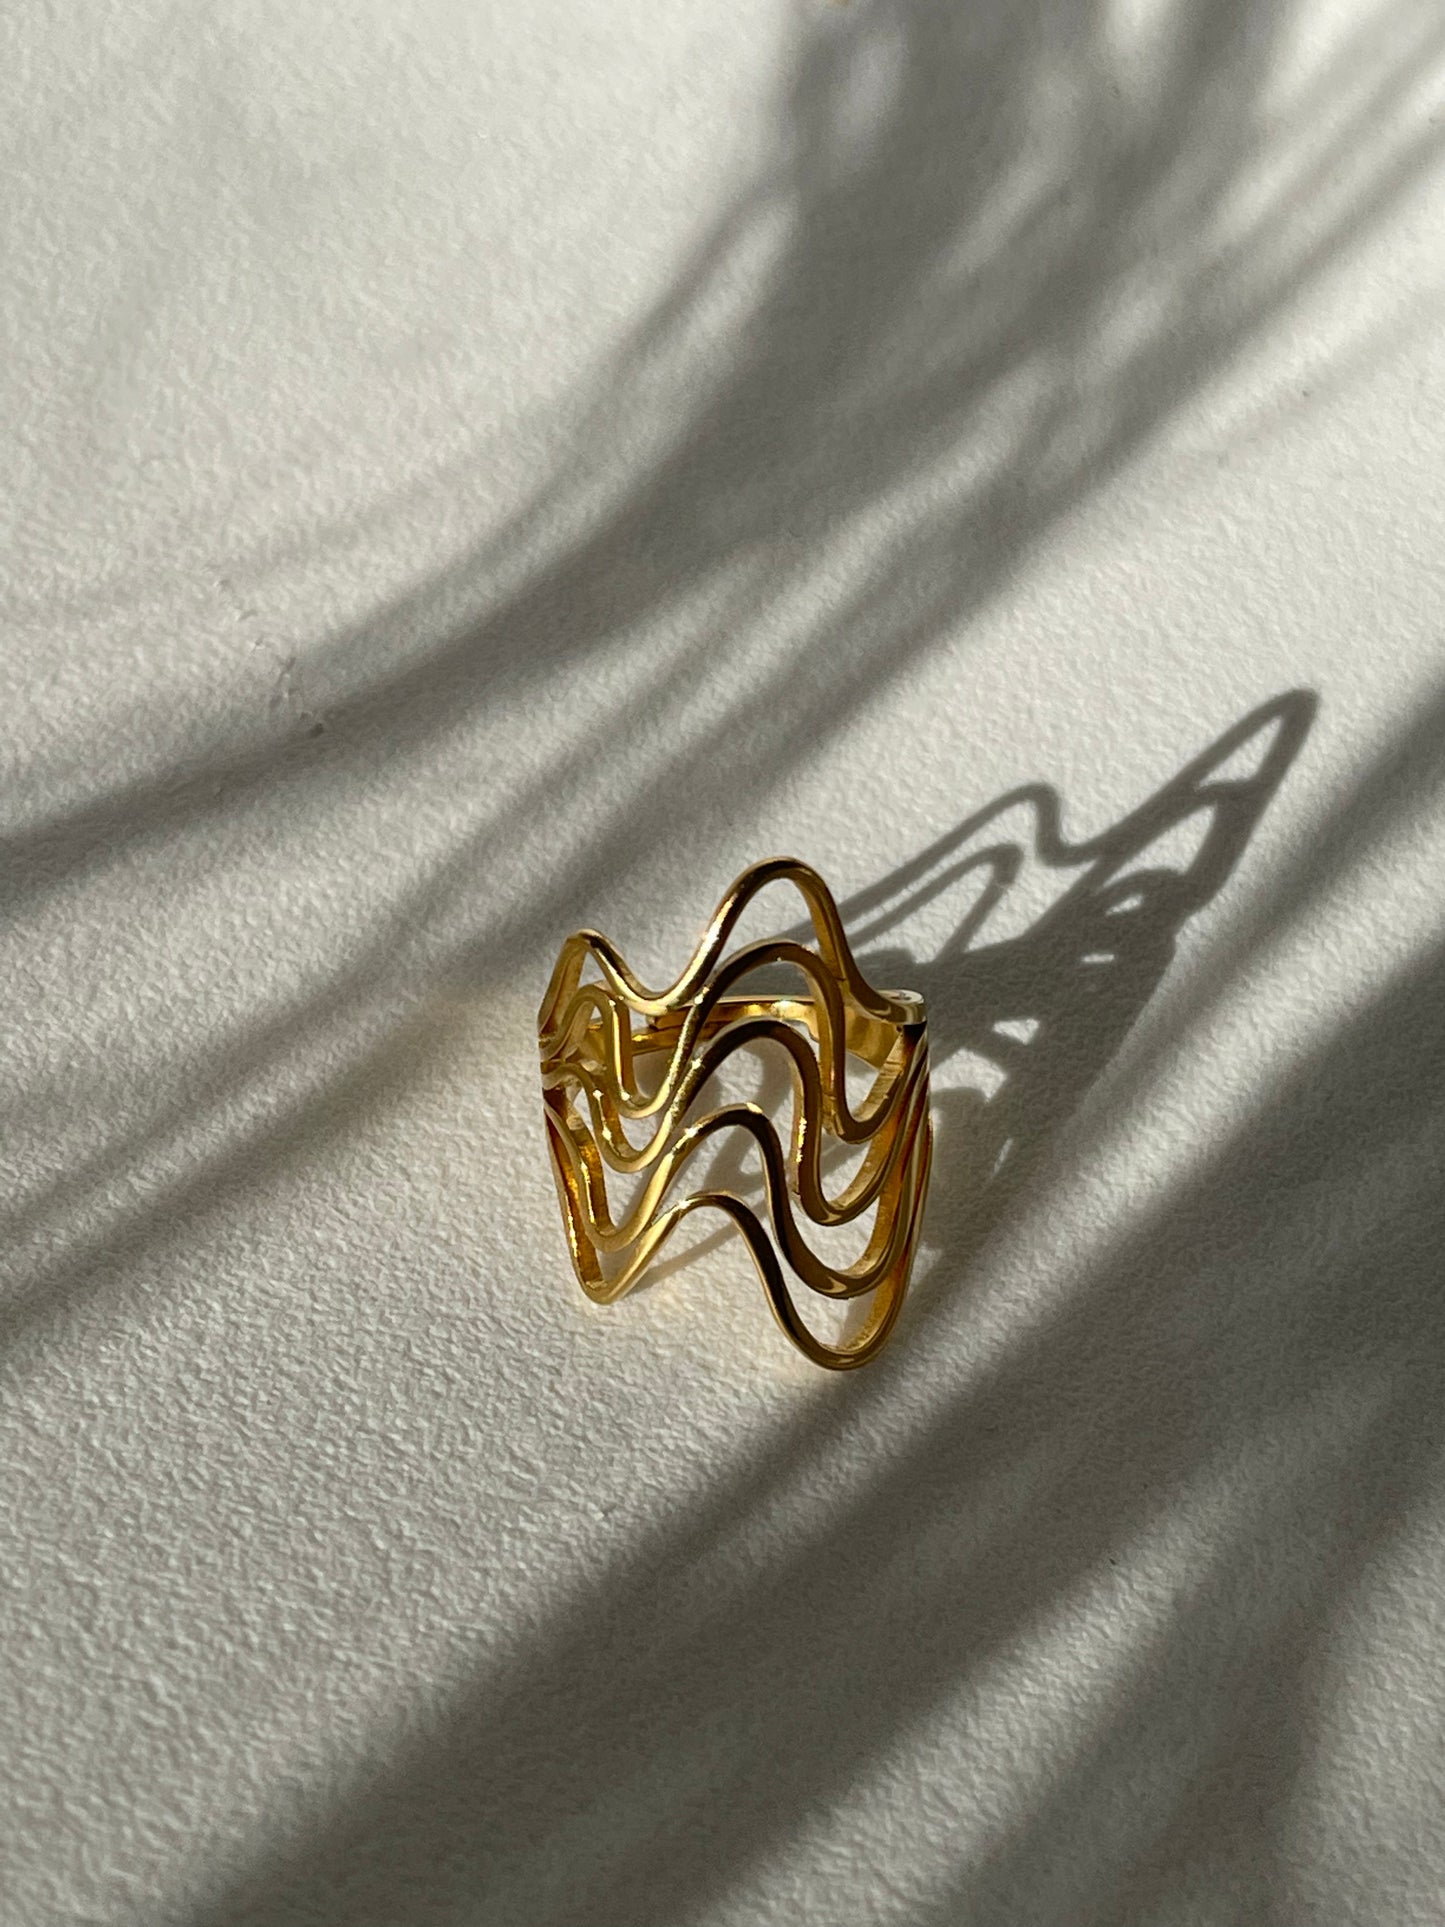 Desert Wave Stainless Steel Statement Ring In 18k Gold Plated